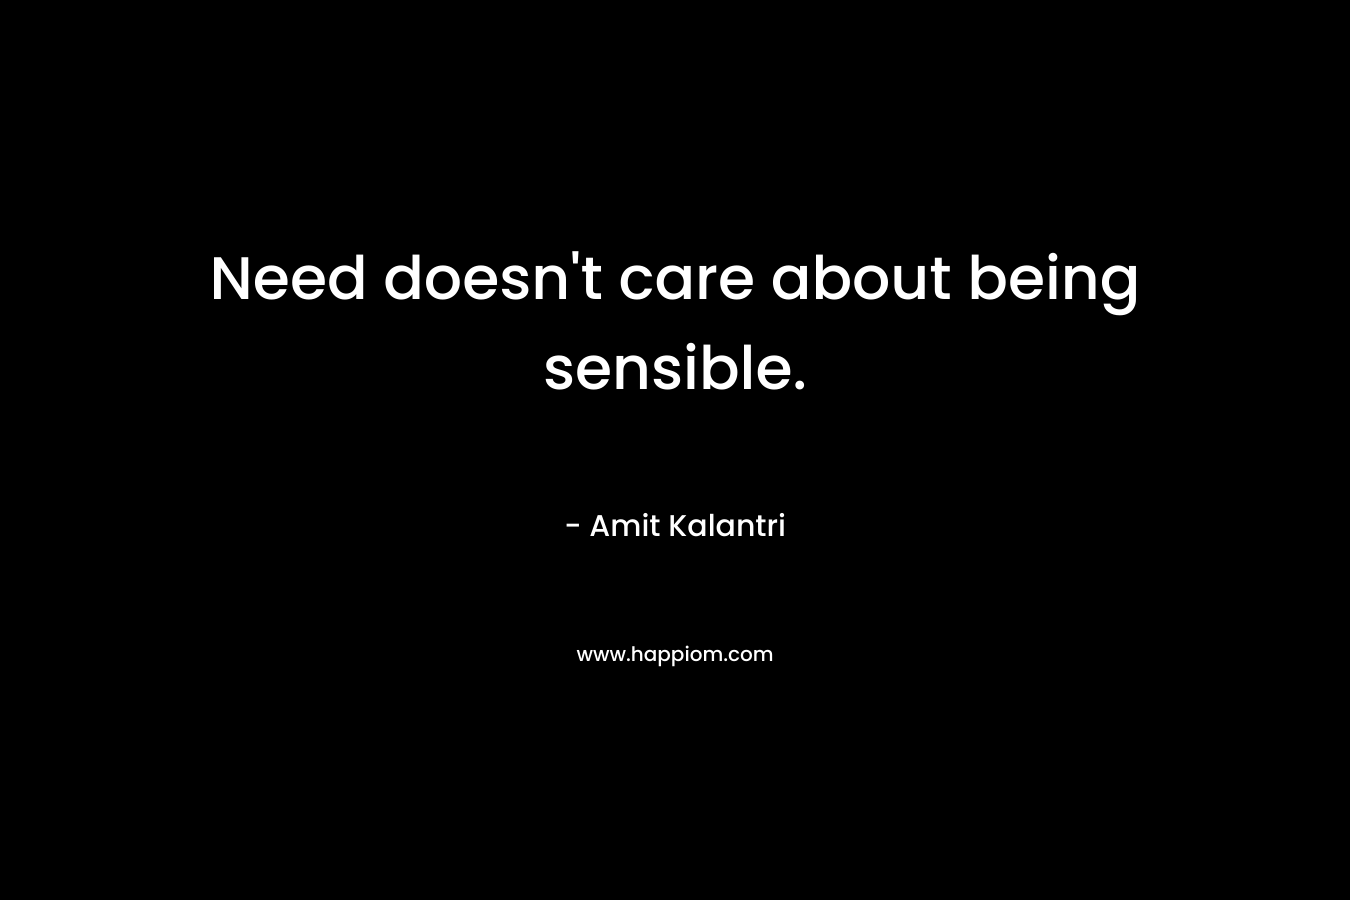 Need doesn’t care about being sensible. – Amit Kalantri